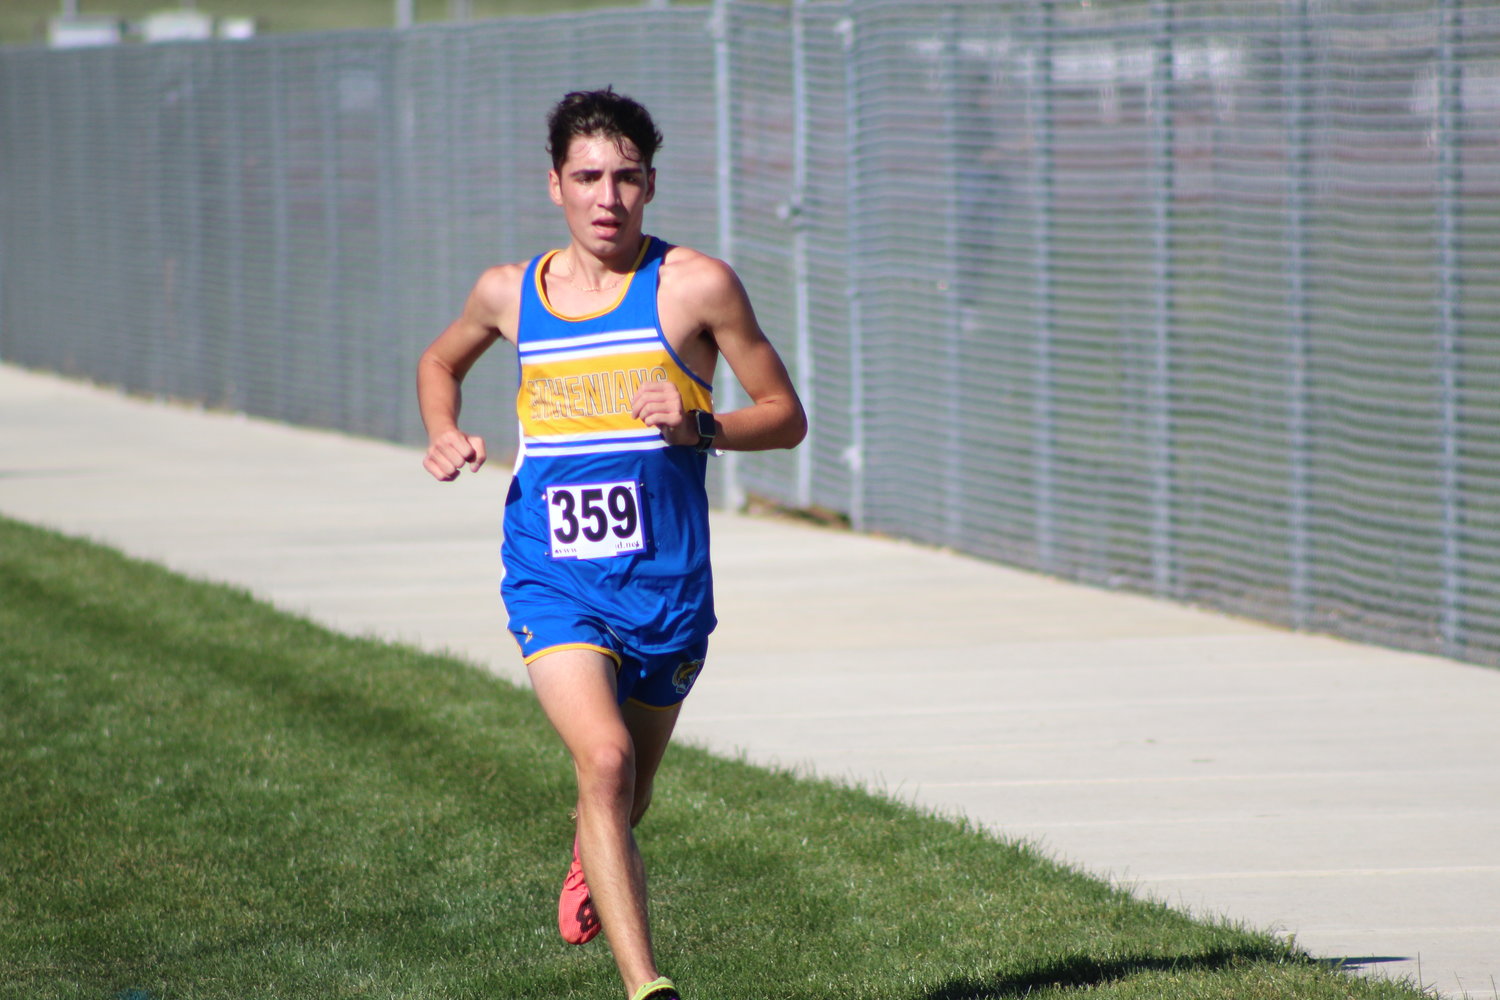 Crawfordsville's Ryan Miller placed 2nd overall in the boys race and earned 1st-Team All-SAC honors.